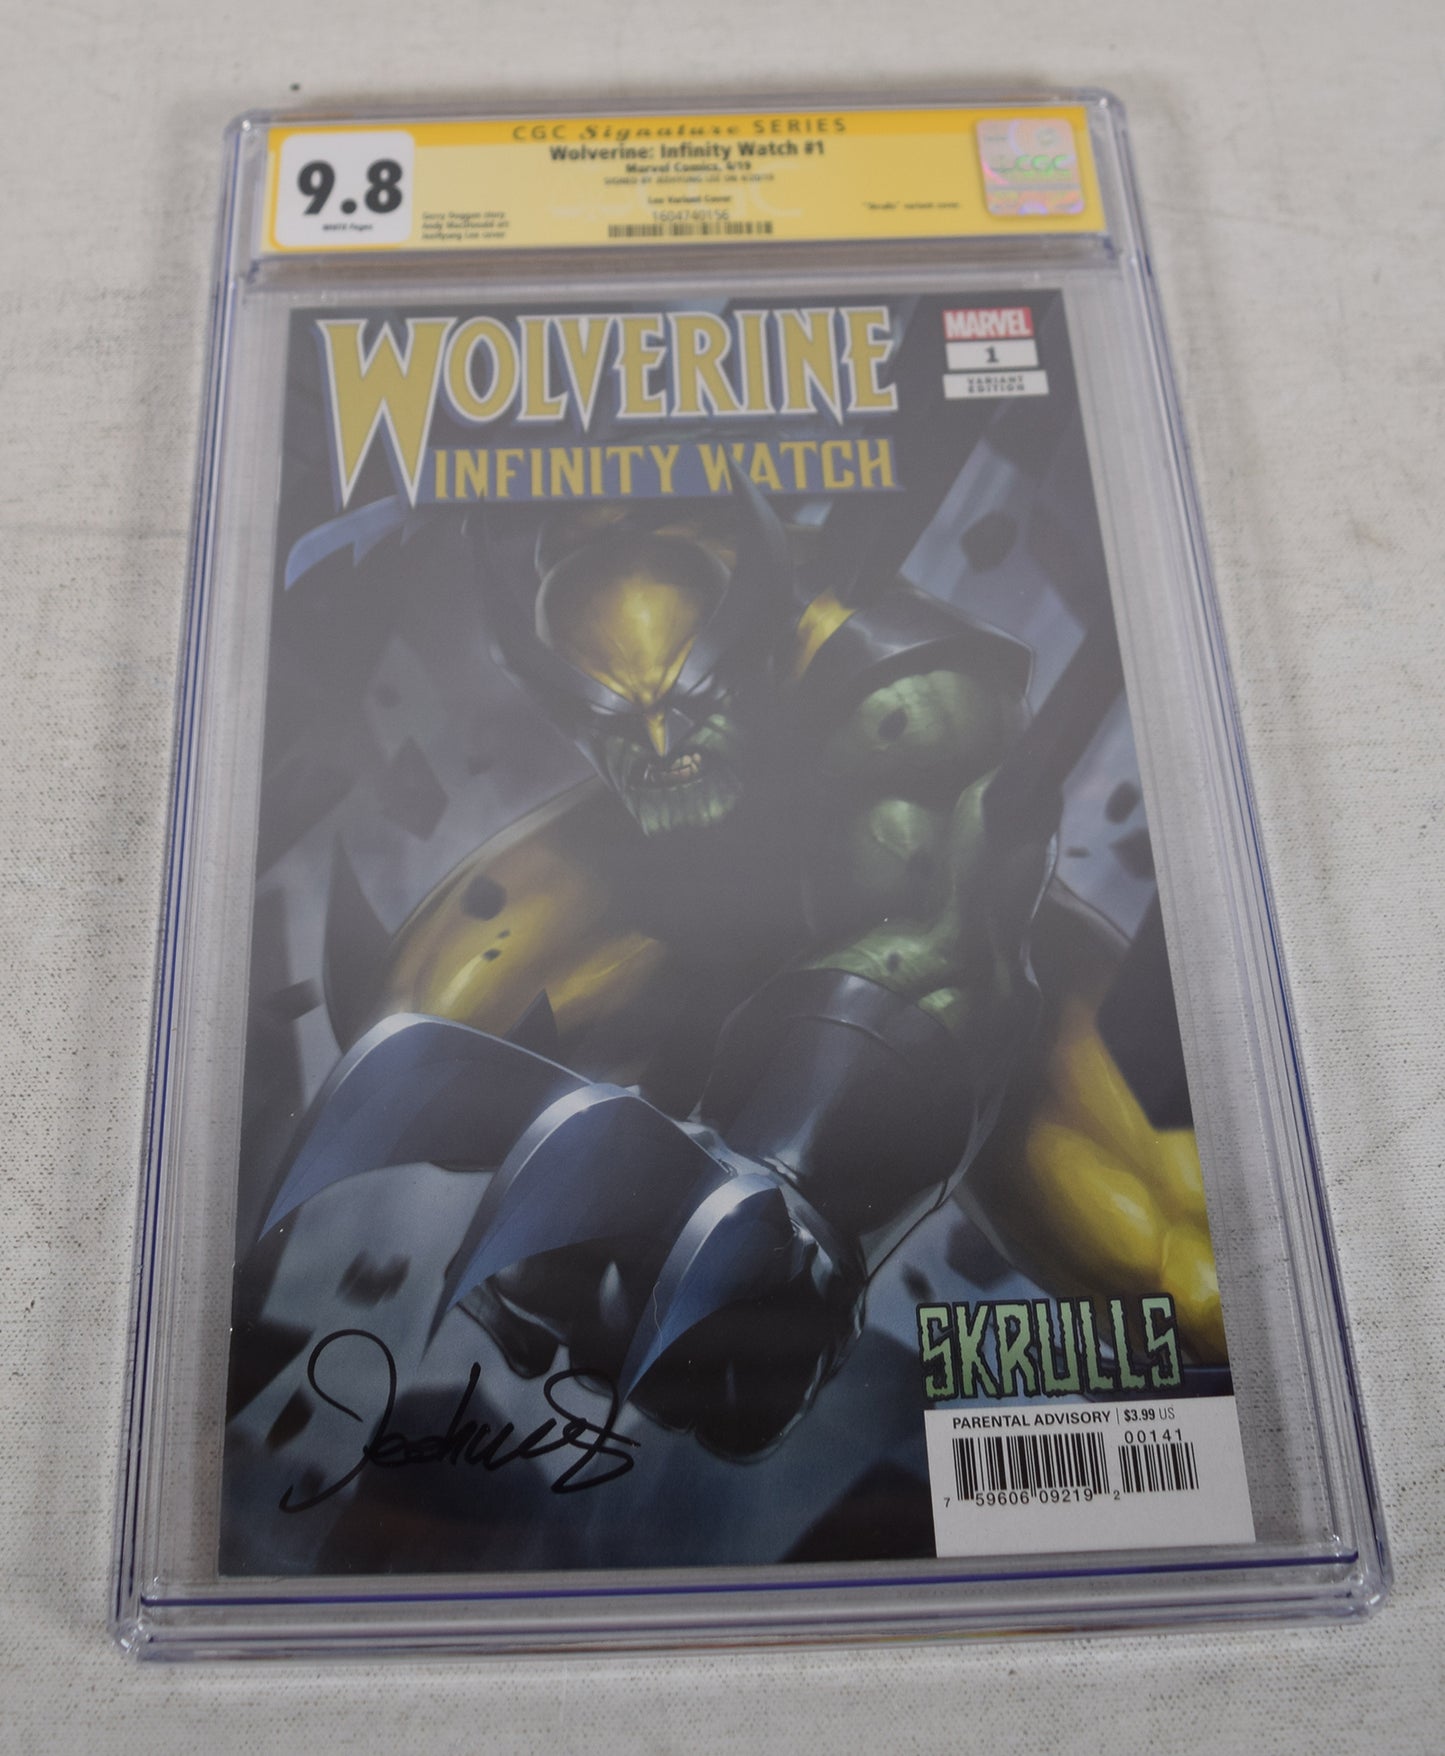 Wolverine Infinity Watch 1 Marvel CGC SS 9.8 Jeehyung Lee Signed Variant